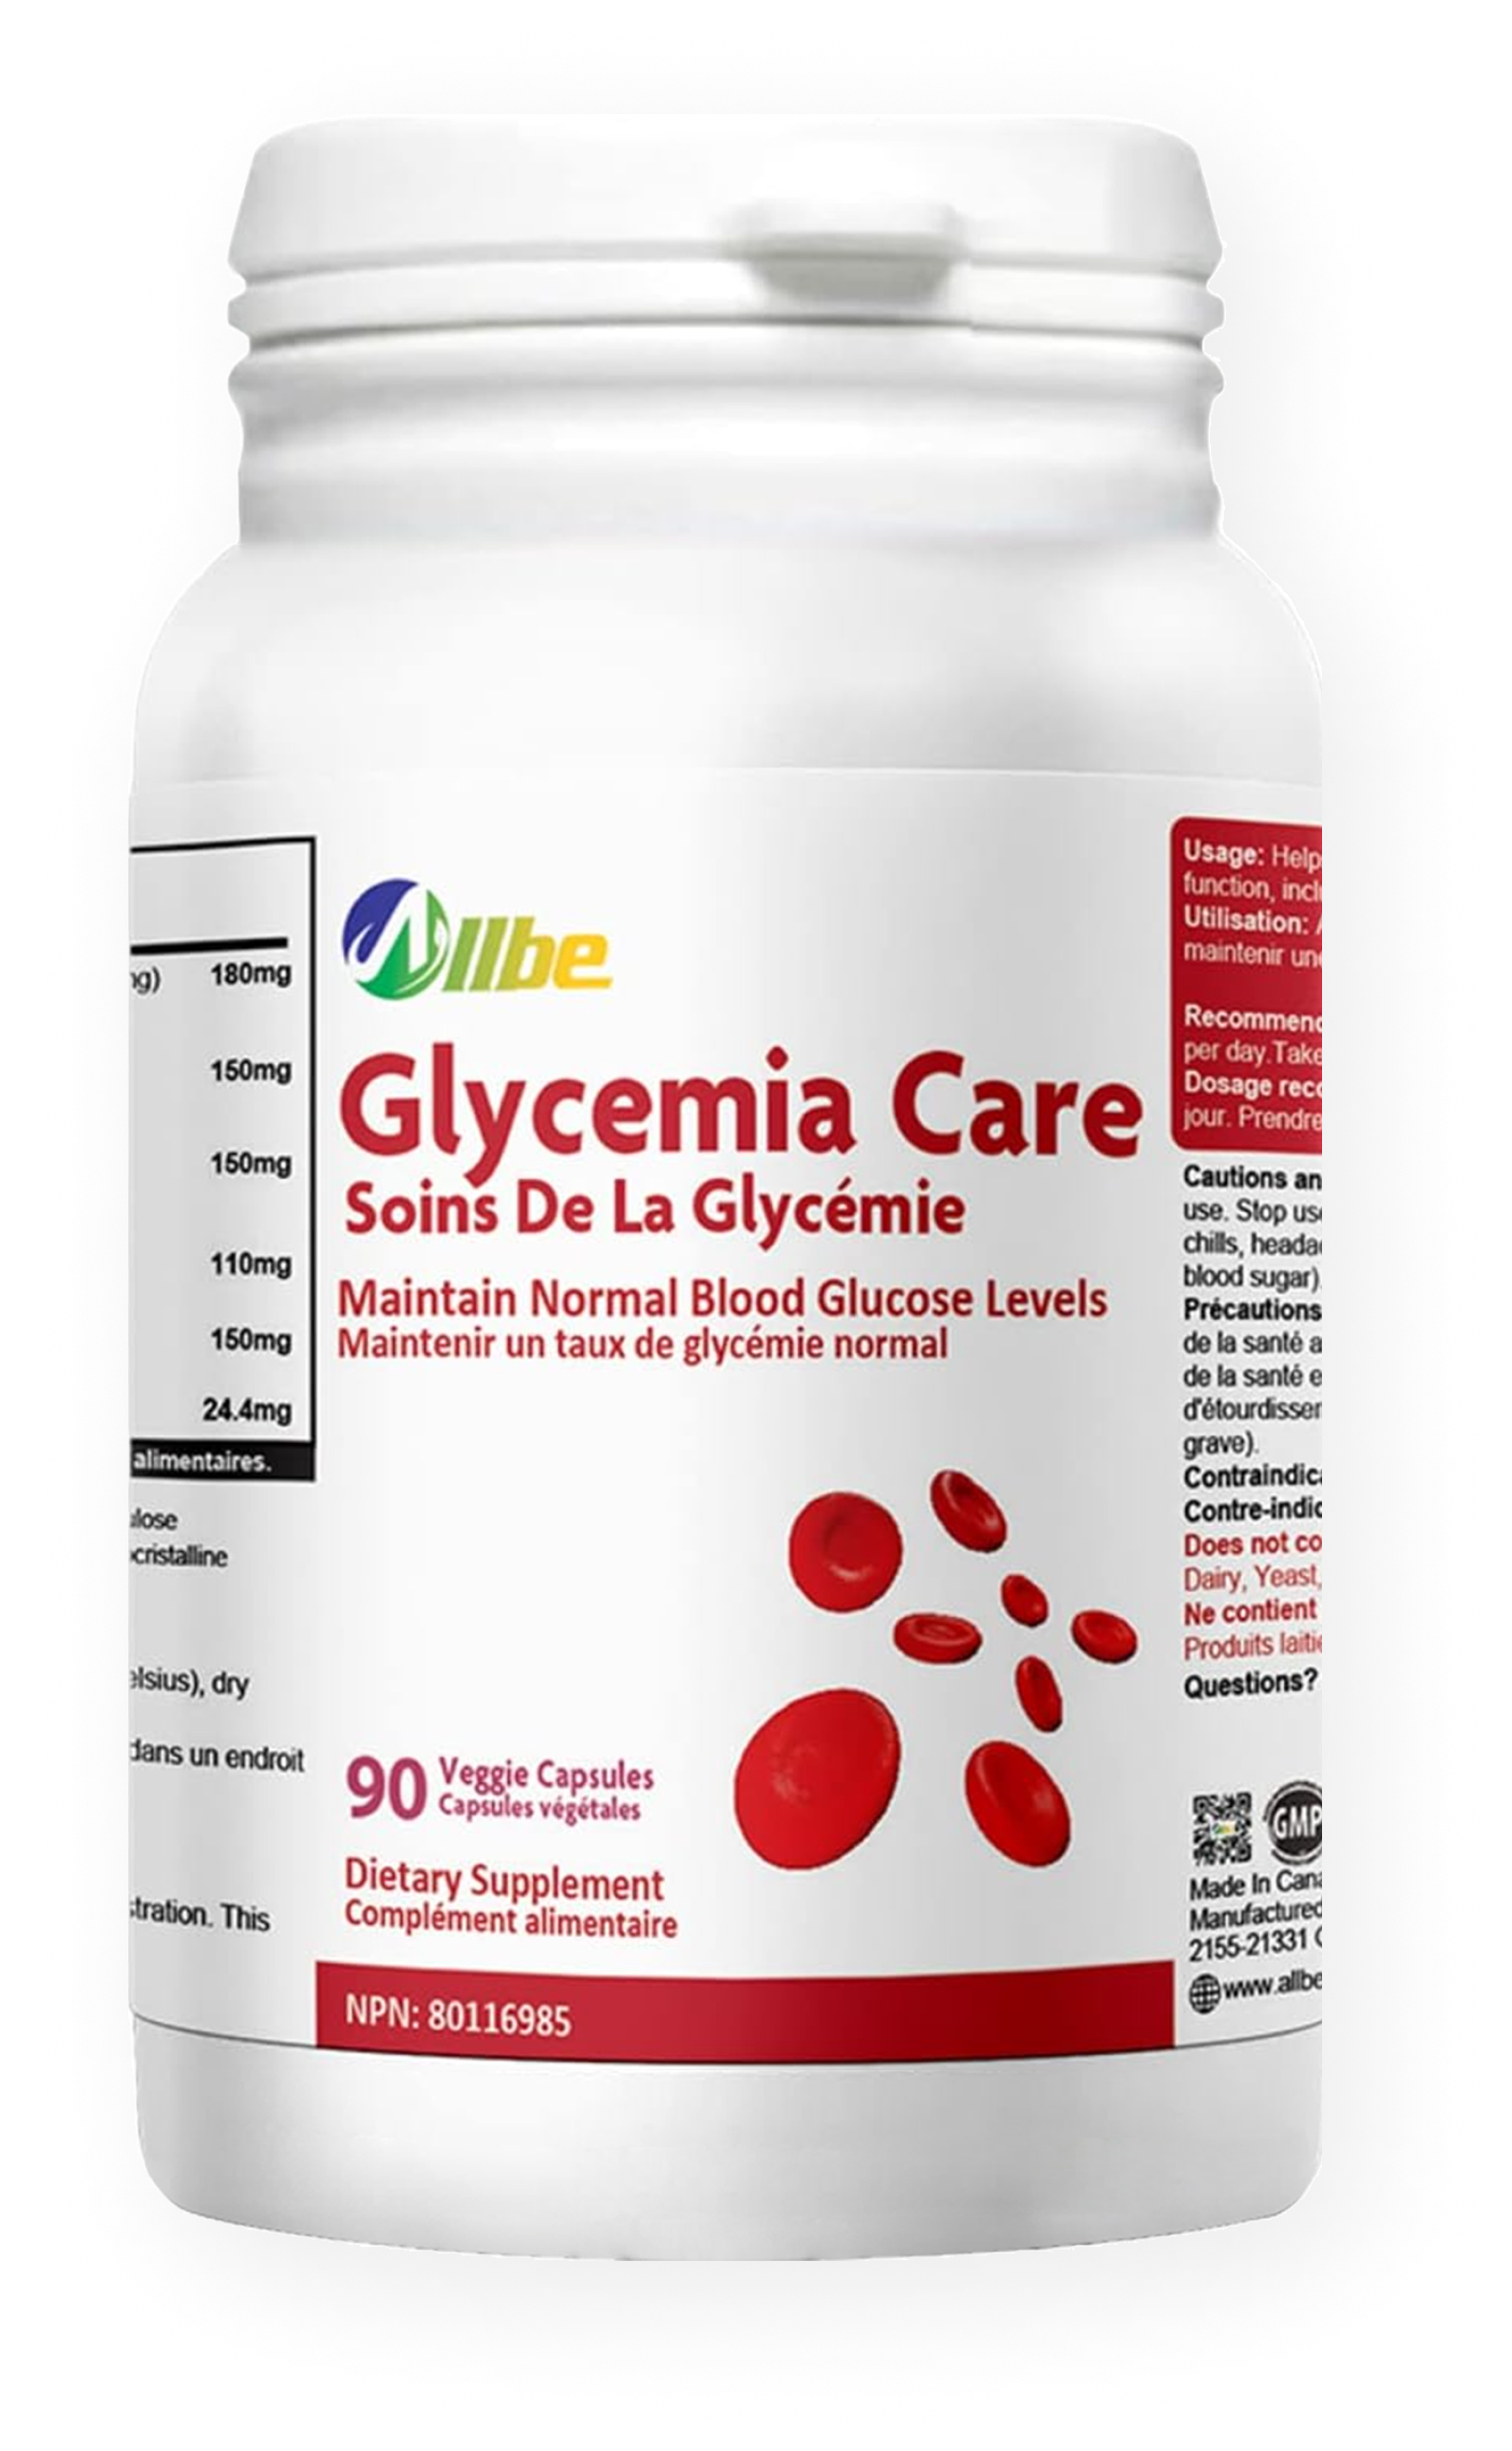 Glycemia Care health supplements